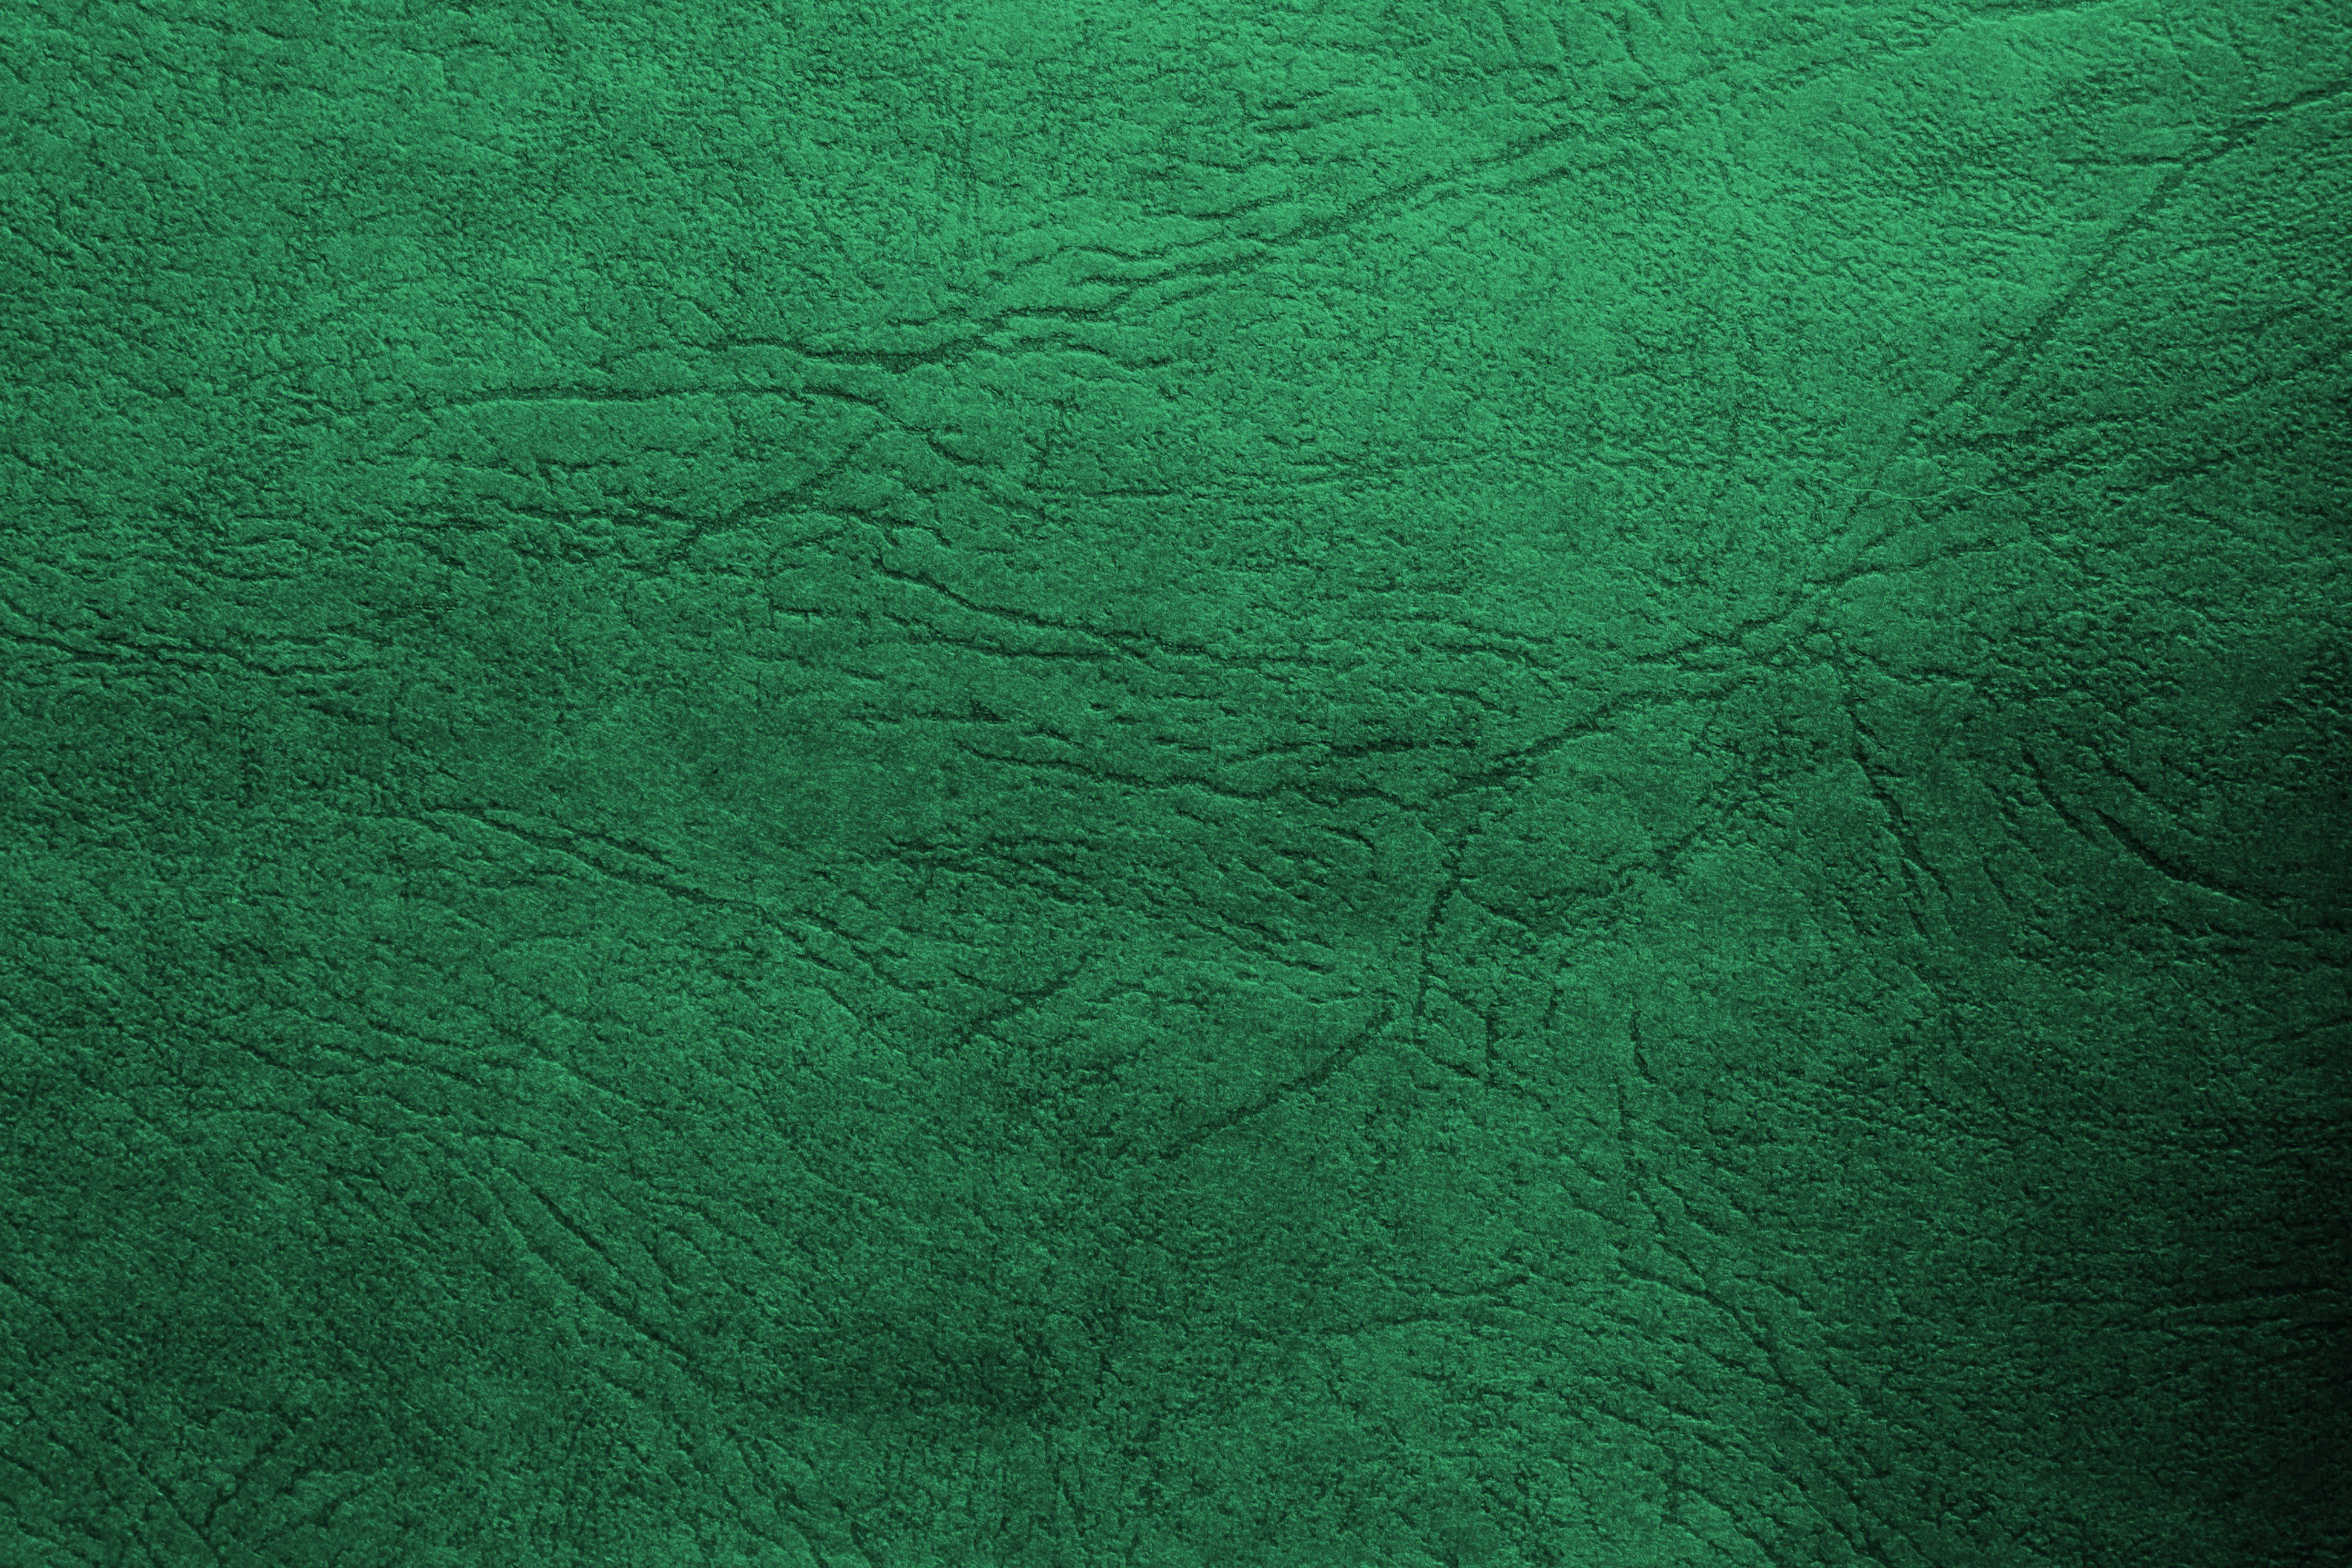 Green Leather Texture   Free High Resolution Photo   Dimensions 3888